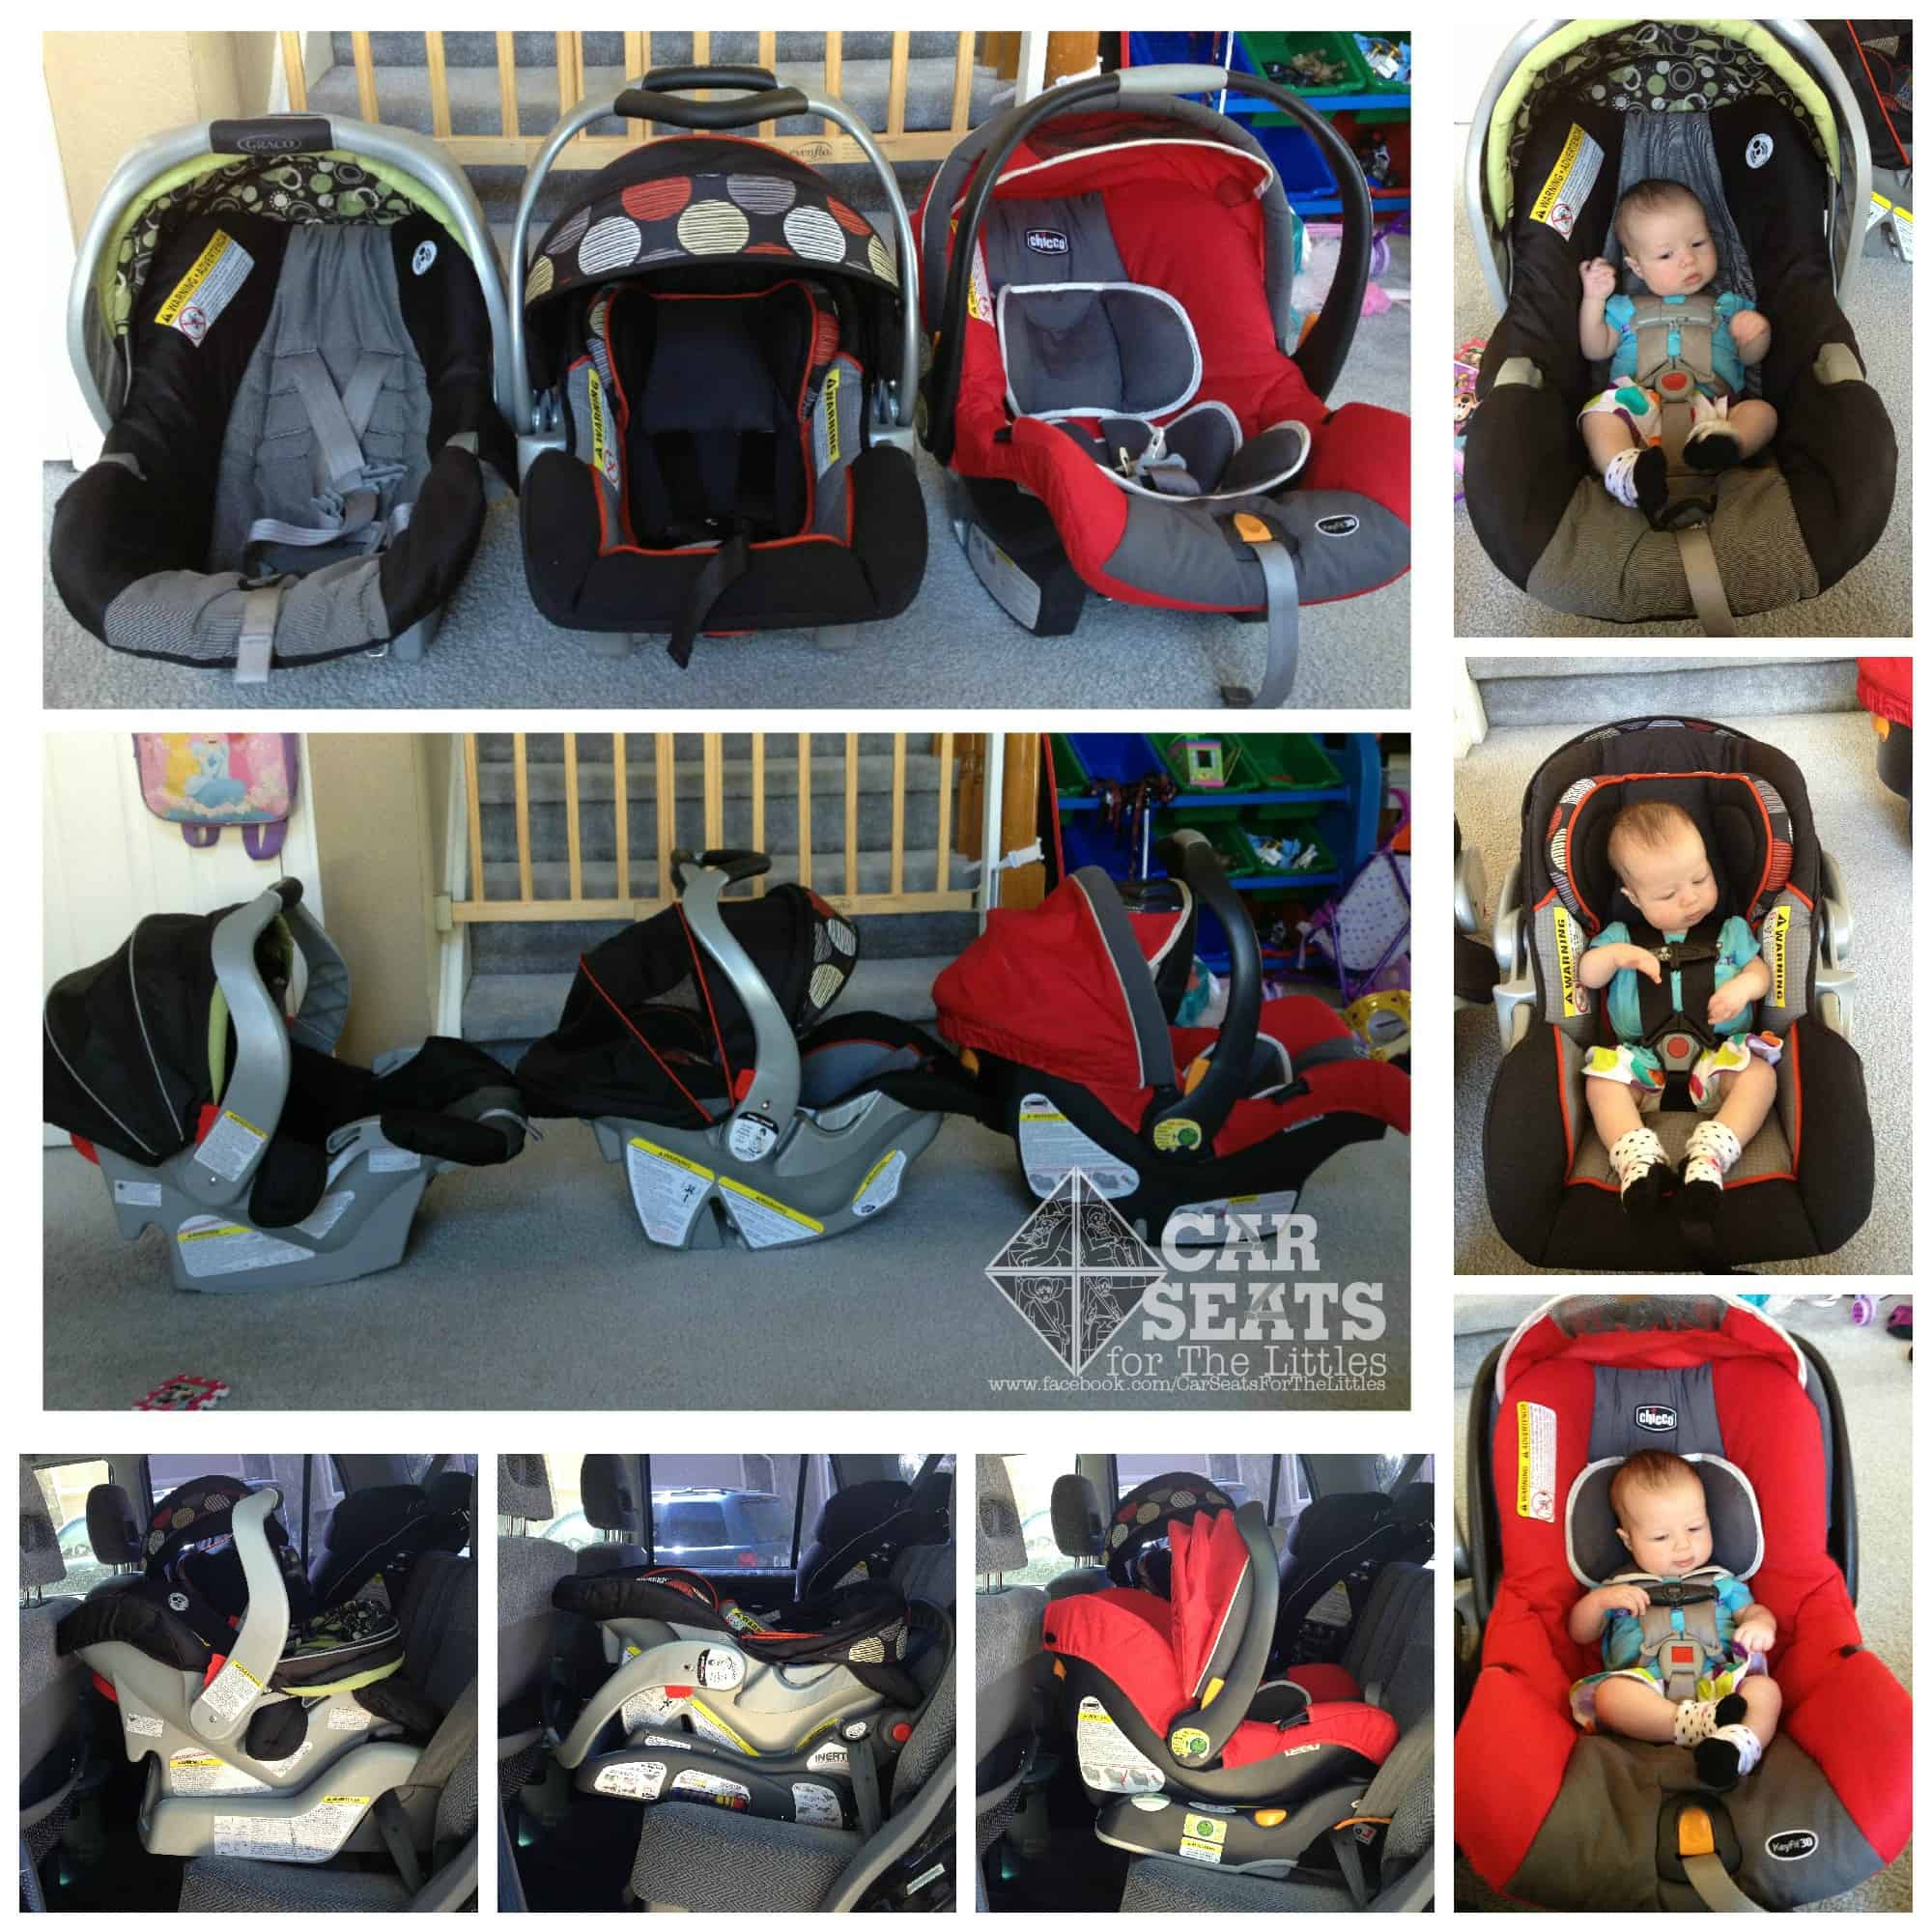 Baby Trend Inertia Review Car Seats For The Littles - Are Baby Trend Car Seats Safe